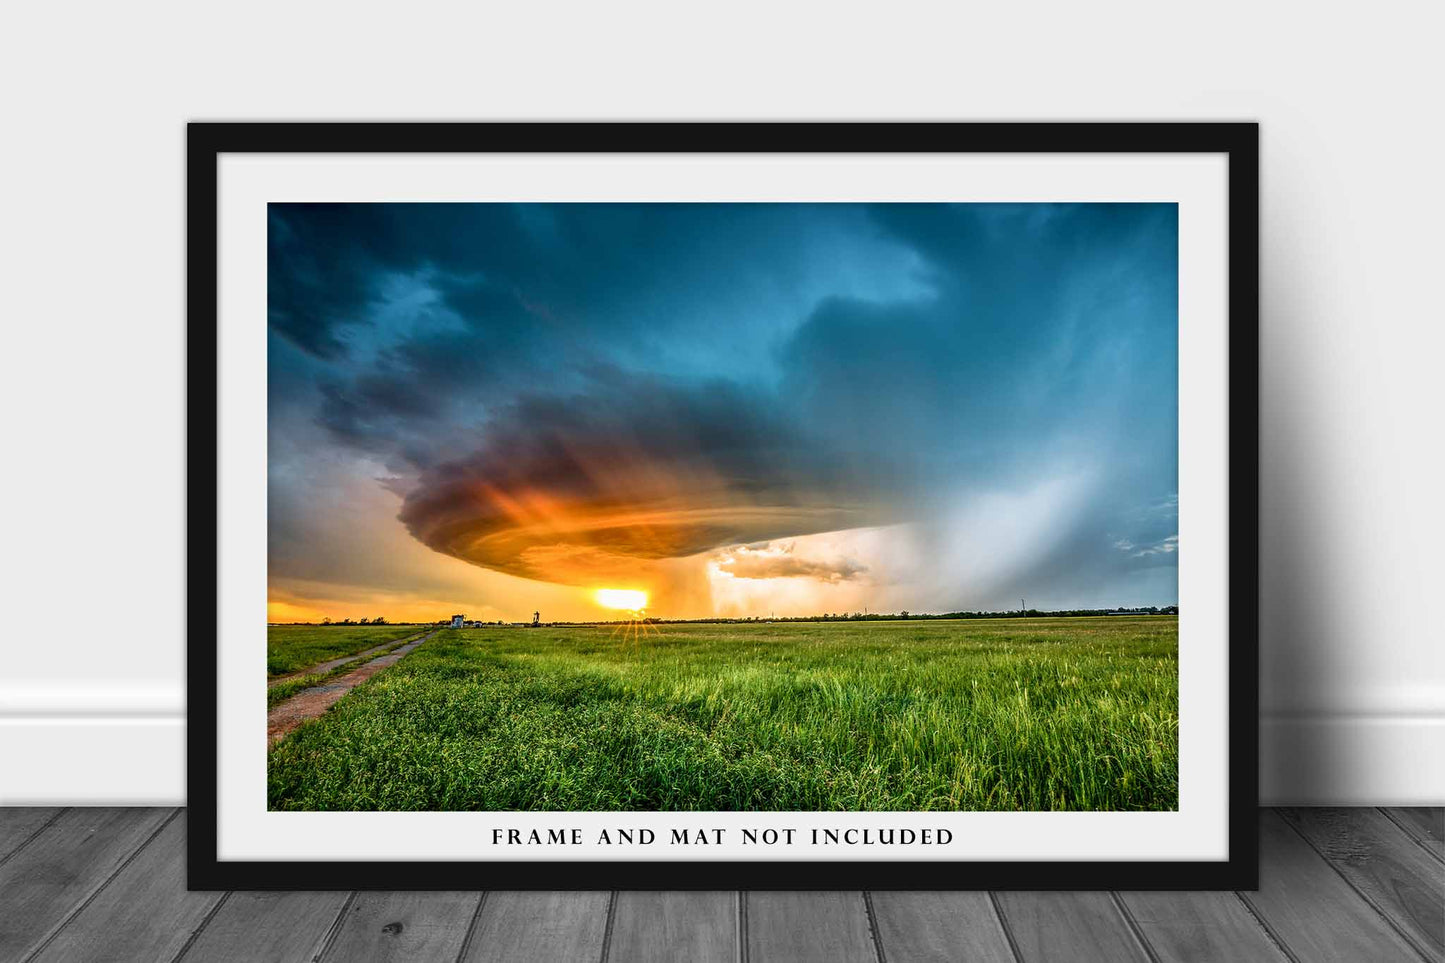 Storm Photography Print (Not Framed) Picture of Supercell Thunderstorm Illuminated by Sunlight at Sunset in Oklahoma Weather Wall Art Nature Decor